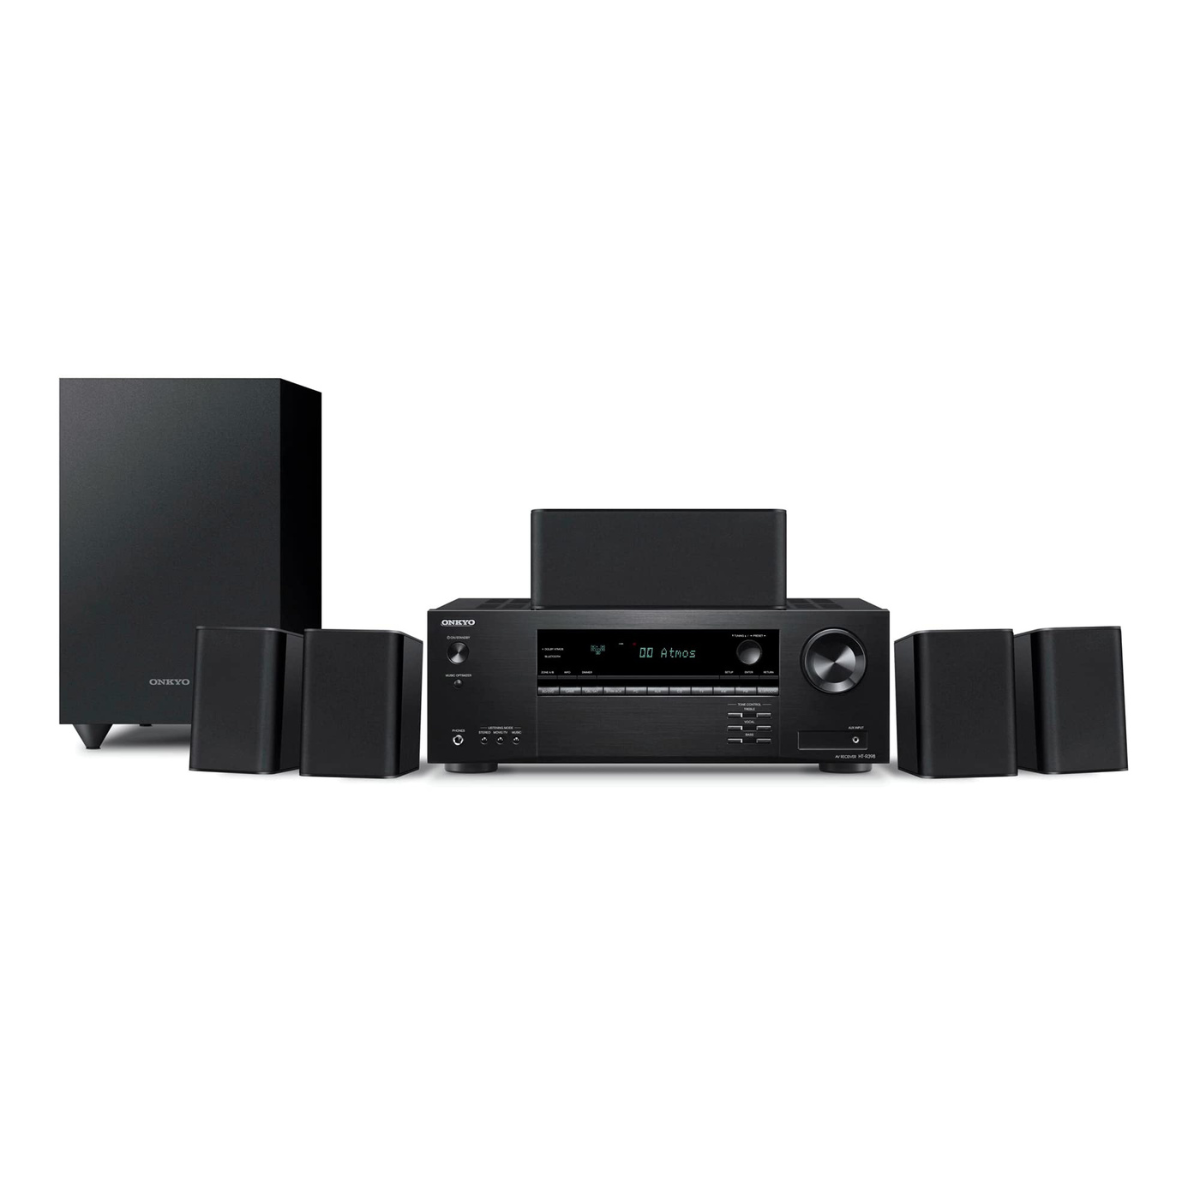 Onkyo HTS-3910 Home Theater Receiver And Speaker Package